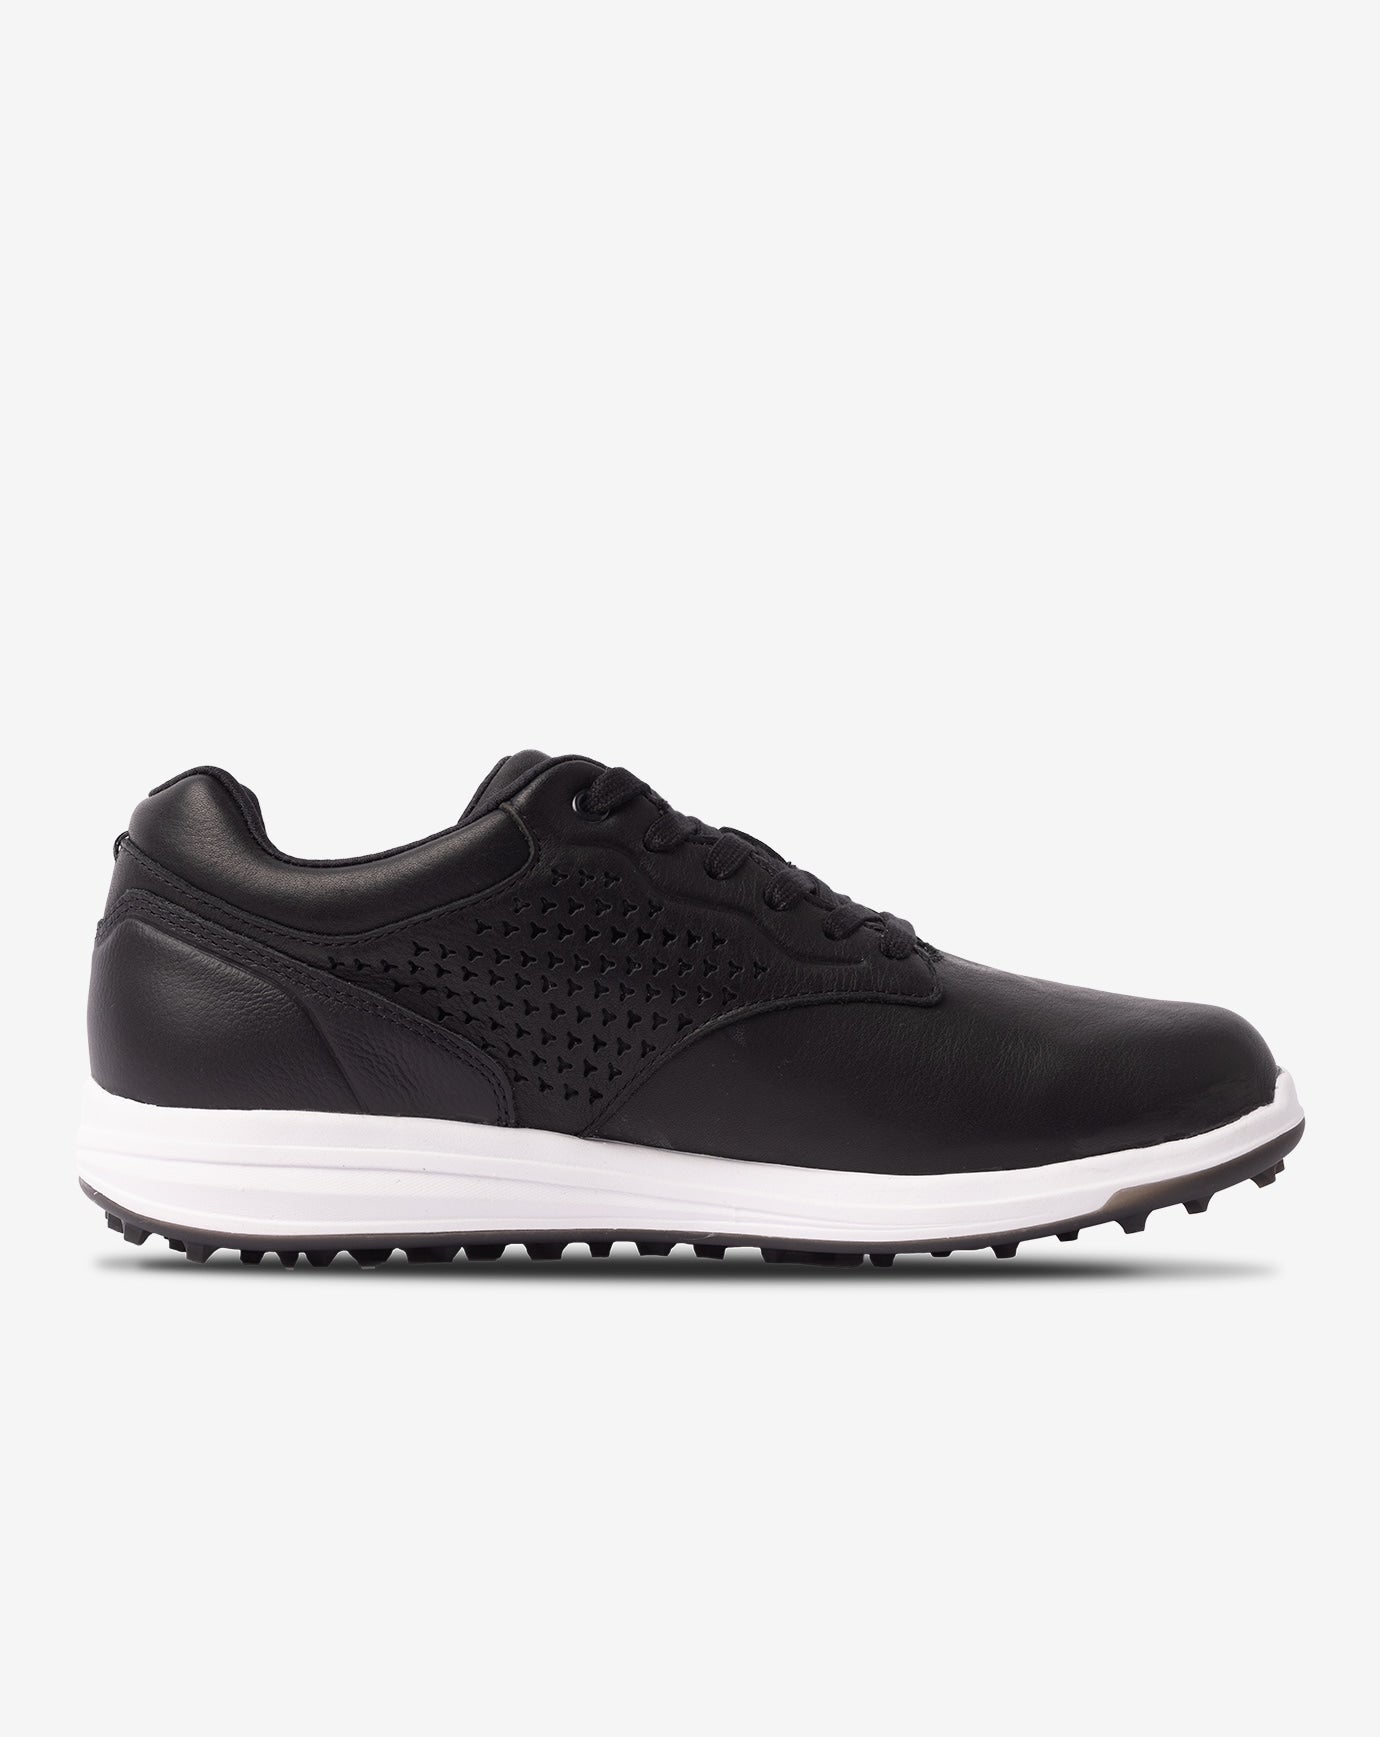 Cuater THE MONEYMAKER LUXE Golf Shoes - Black